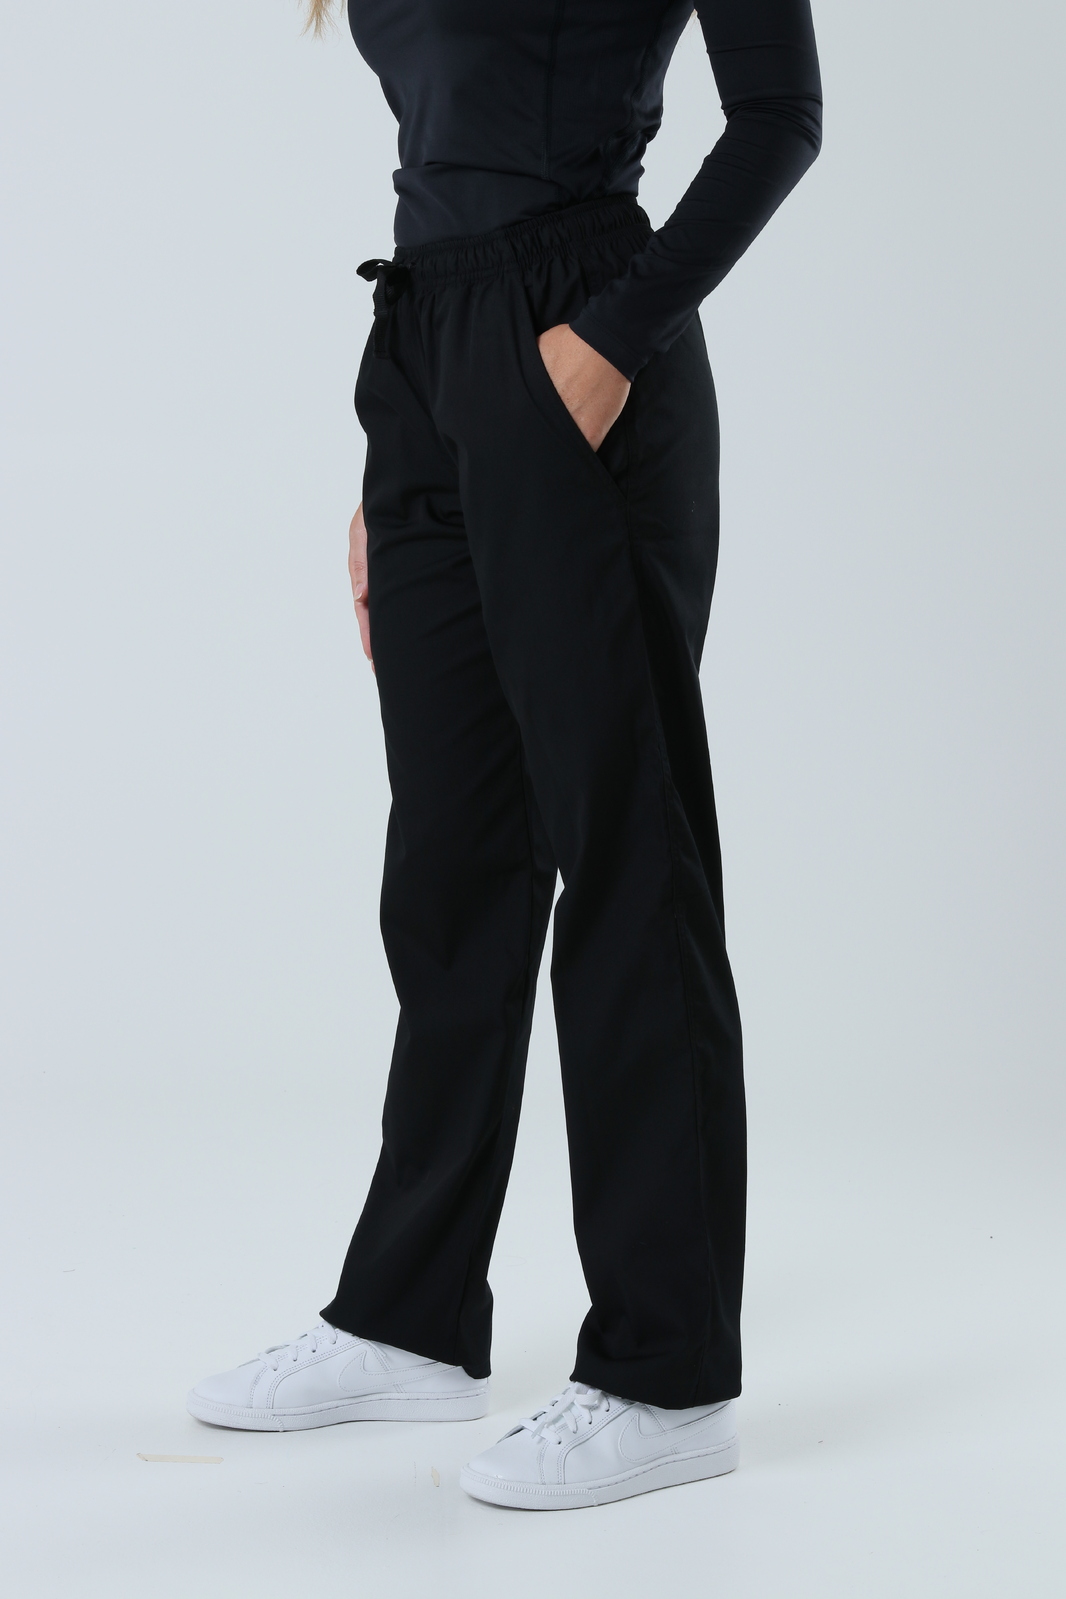 Northpark Private - ED AUM (4 Pocket Scrub Top and Regular Pants in Black incl Logos)